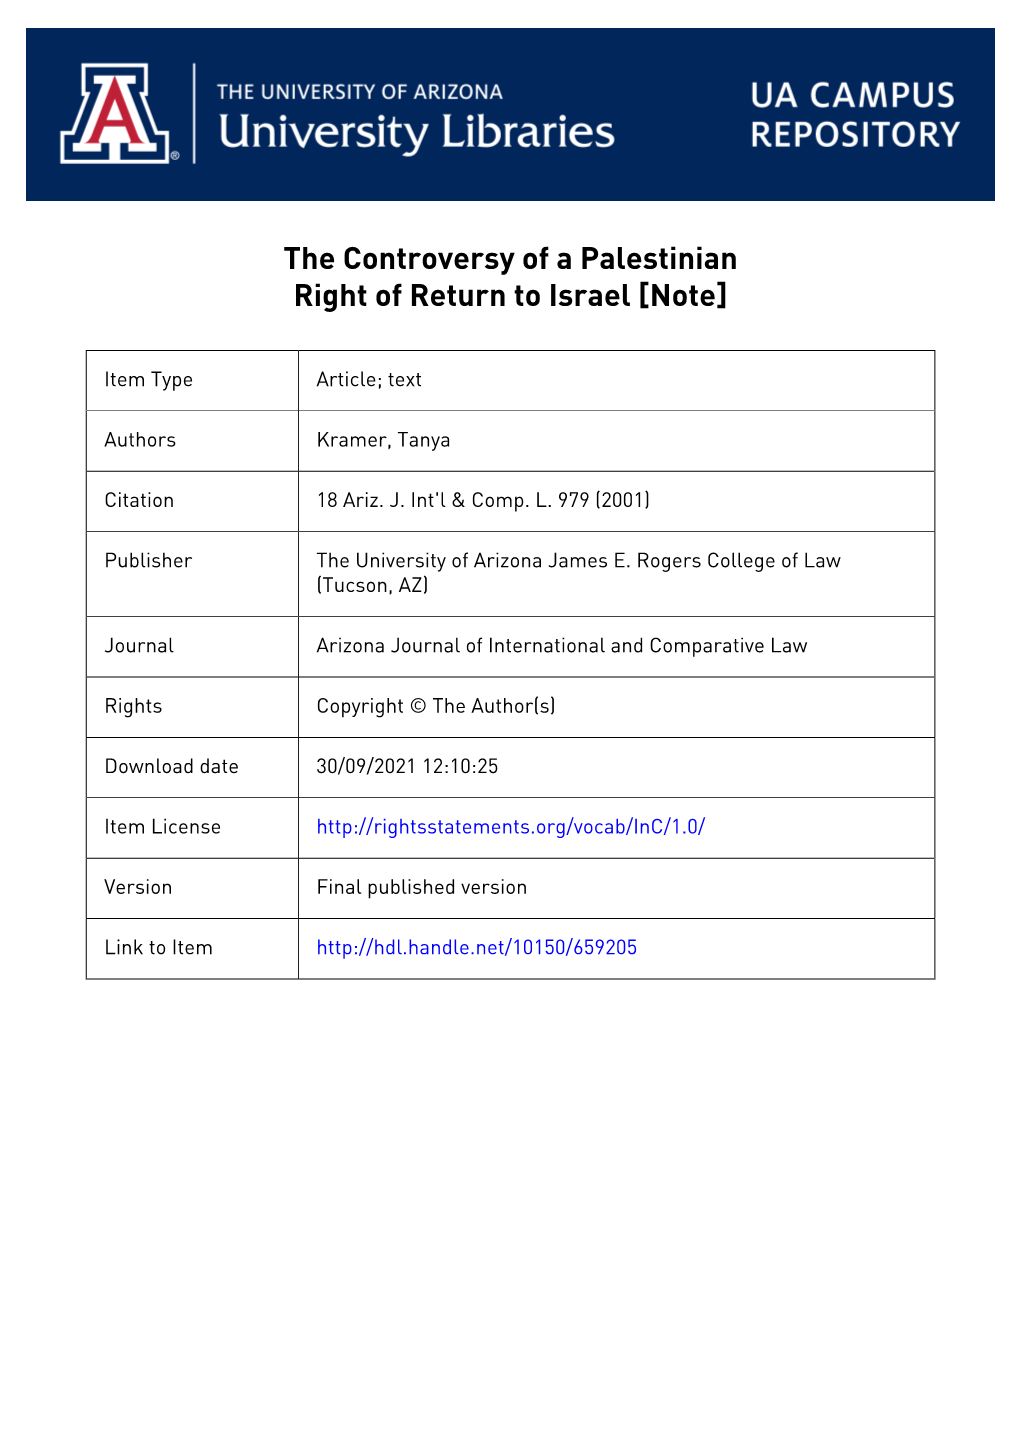 The Controversy of a Palestinian Right of Return to Israel [Note]